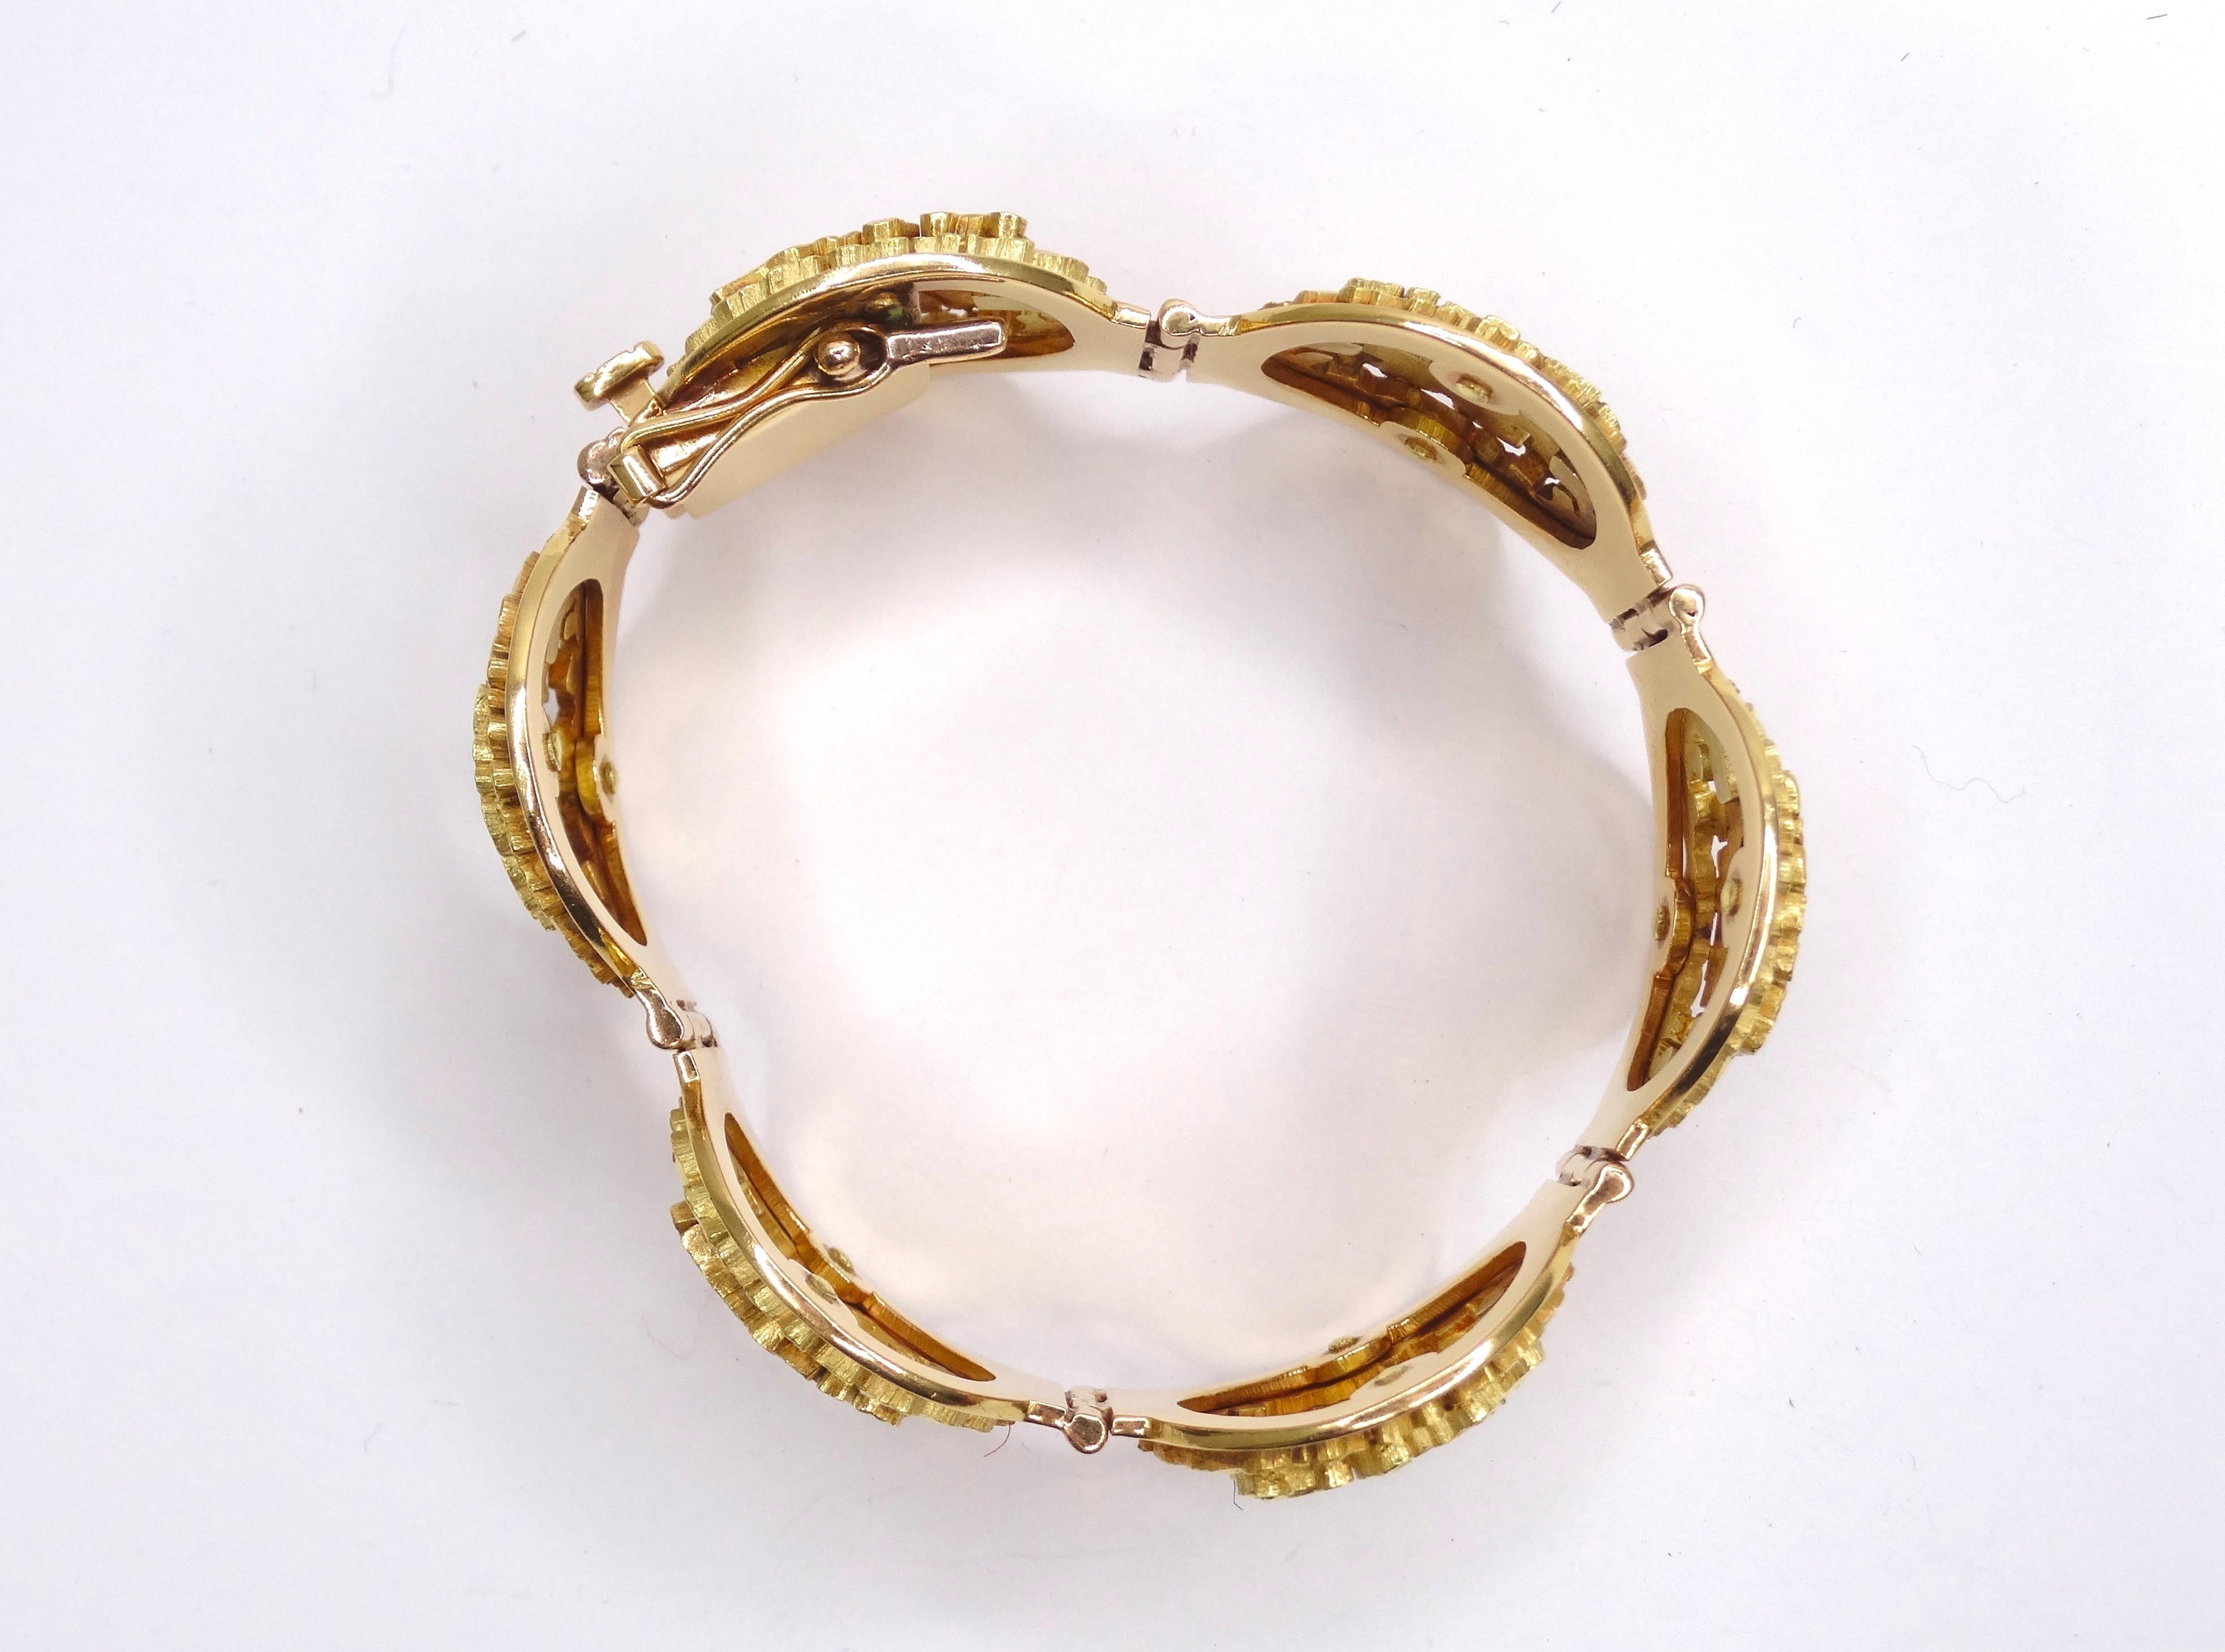 Mayan 1960's 18k Gold Bracelet In Good Condition For Sale In Scottsdale, AZ